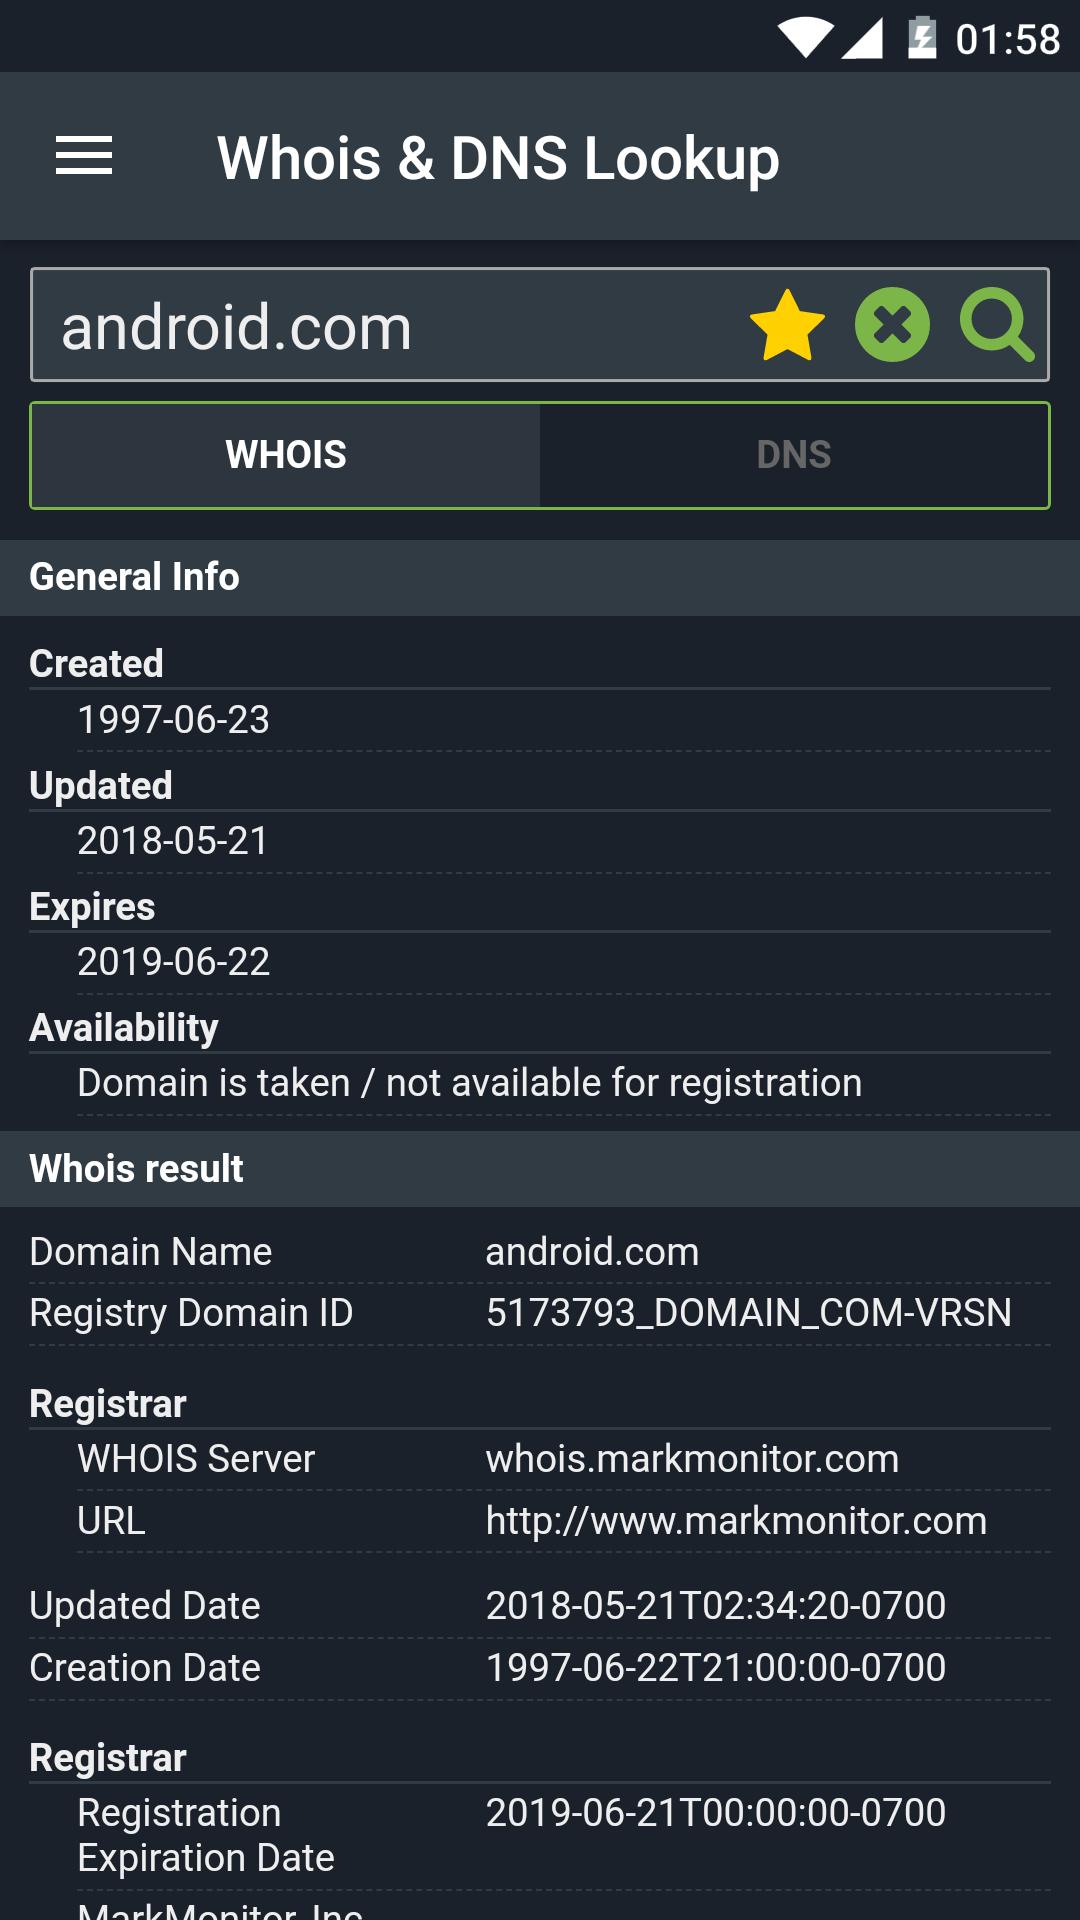 Whois domain lookup